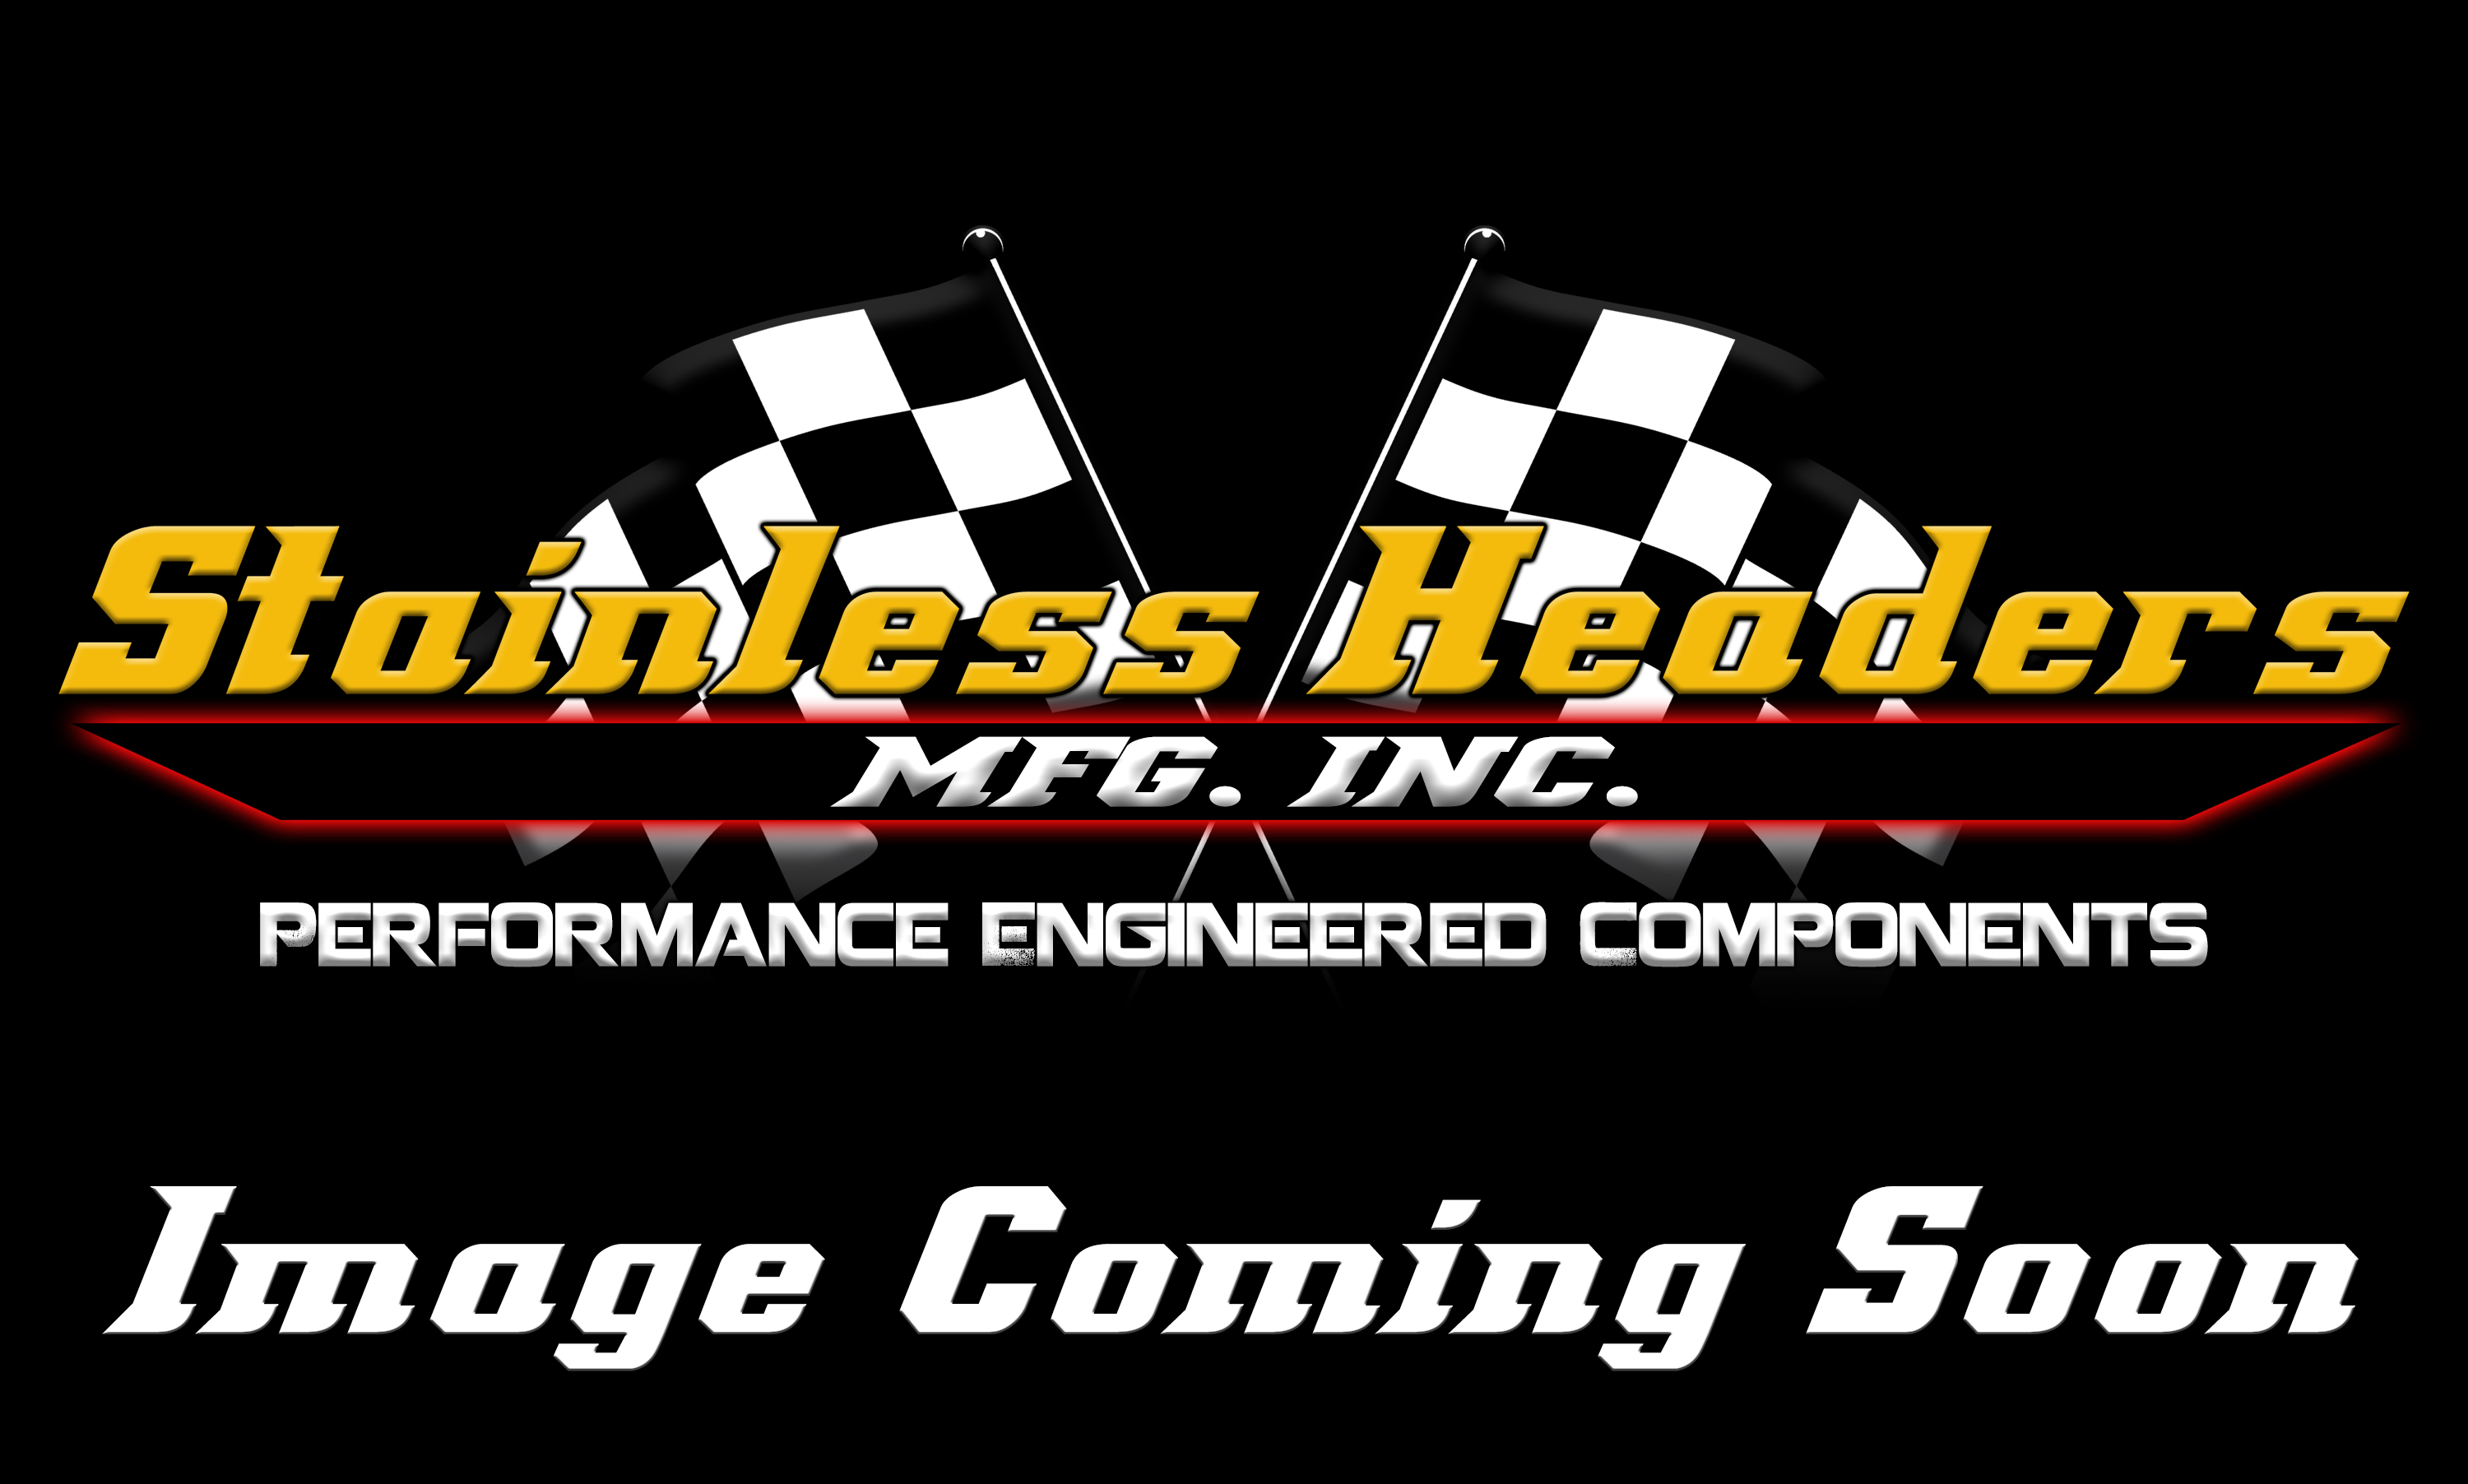 Stainless Headers - 1 3/4" Primary 5 into 1 Performance Merge Collector-16ga 304ss